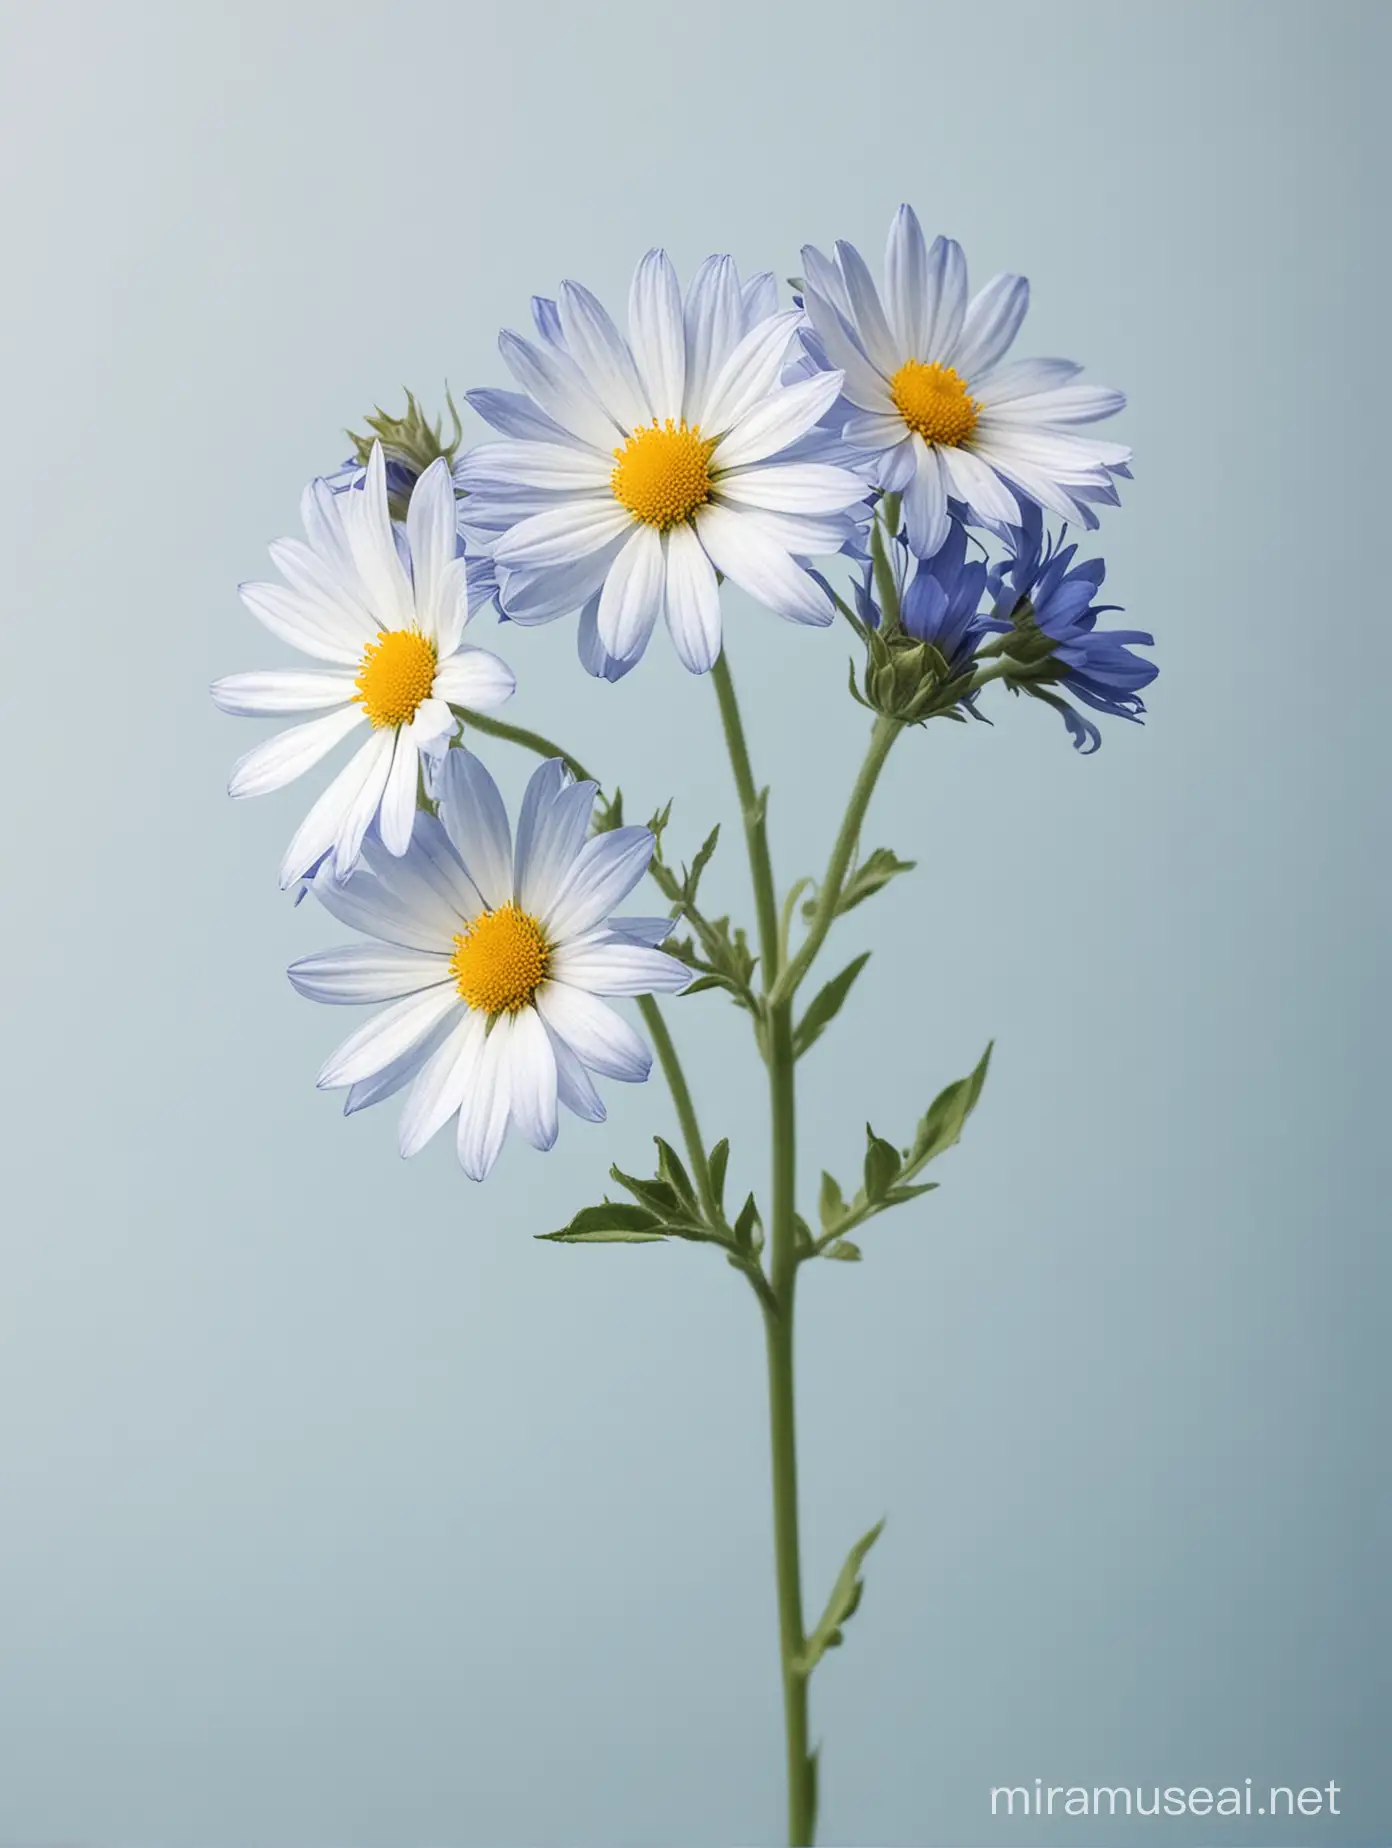 Beautiful Wild Flowers on Blue and White Background